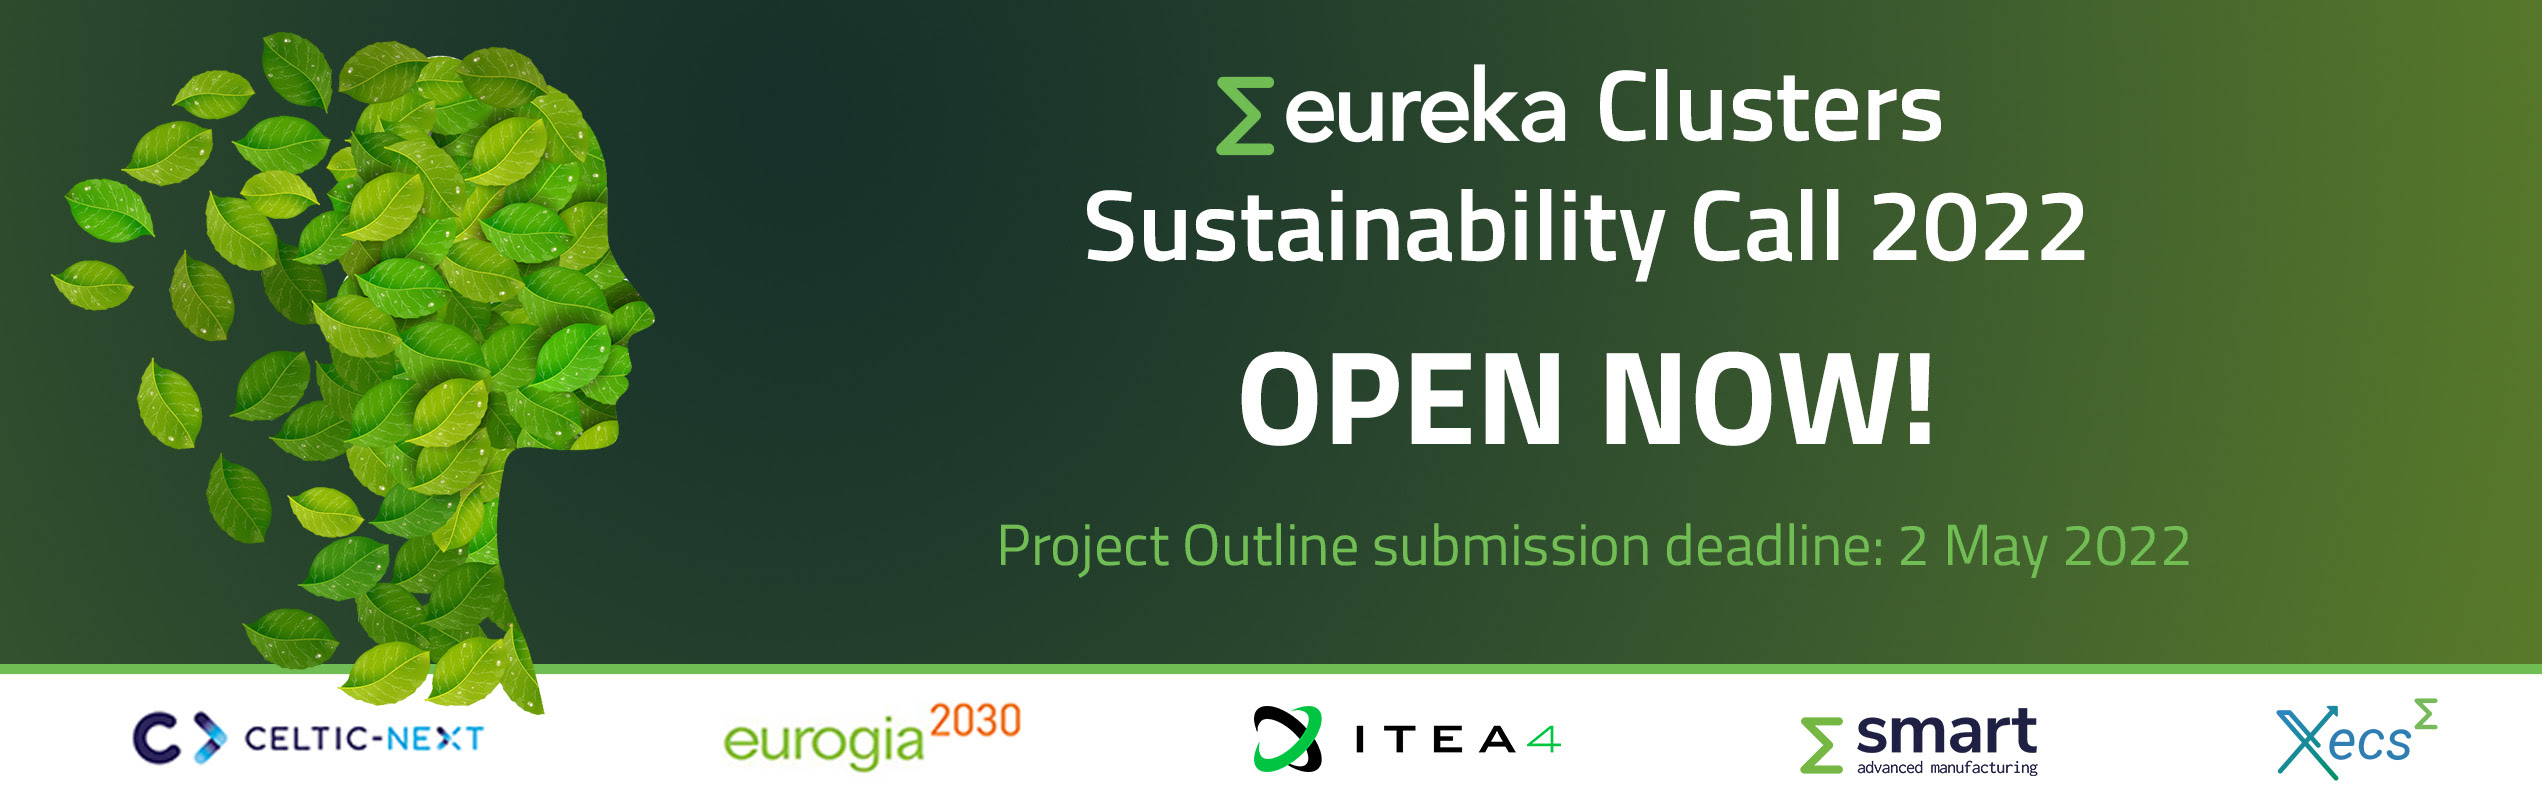 Participate in the Eureka Clusters Sustainability Call 2022